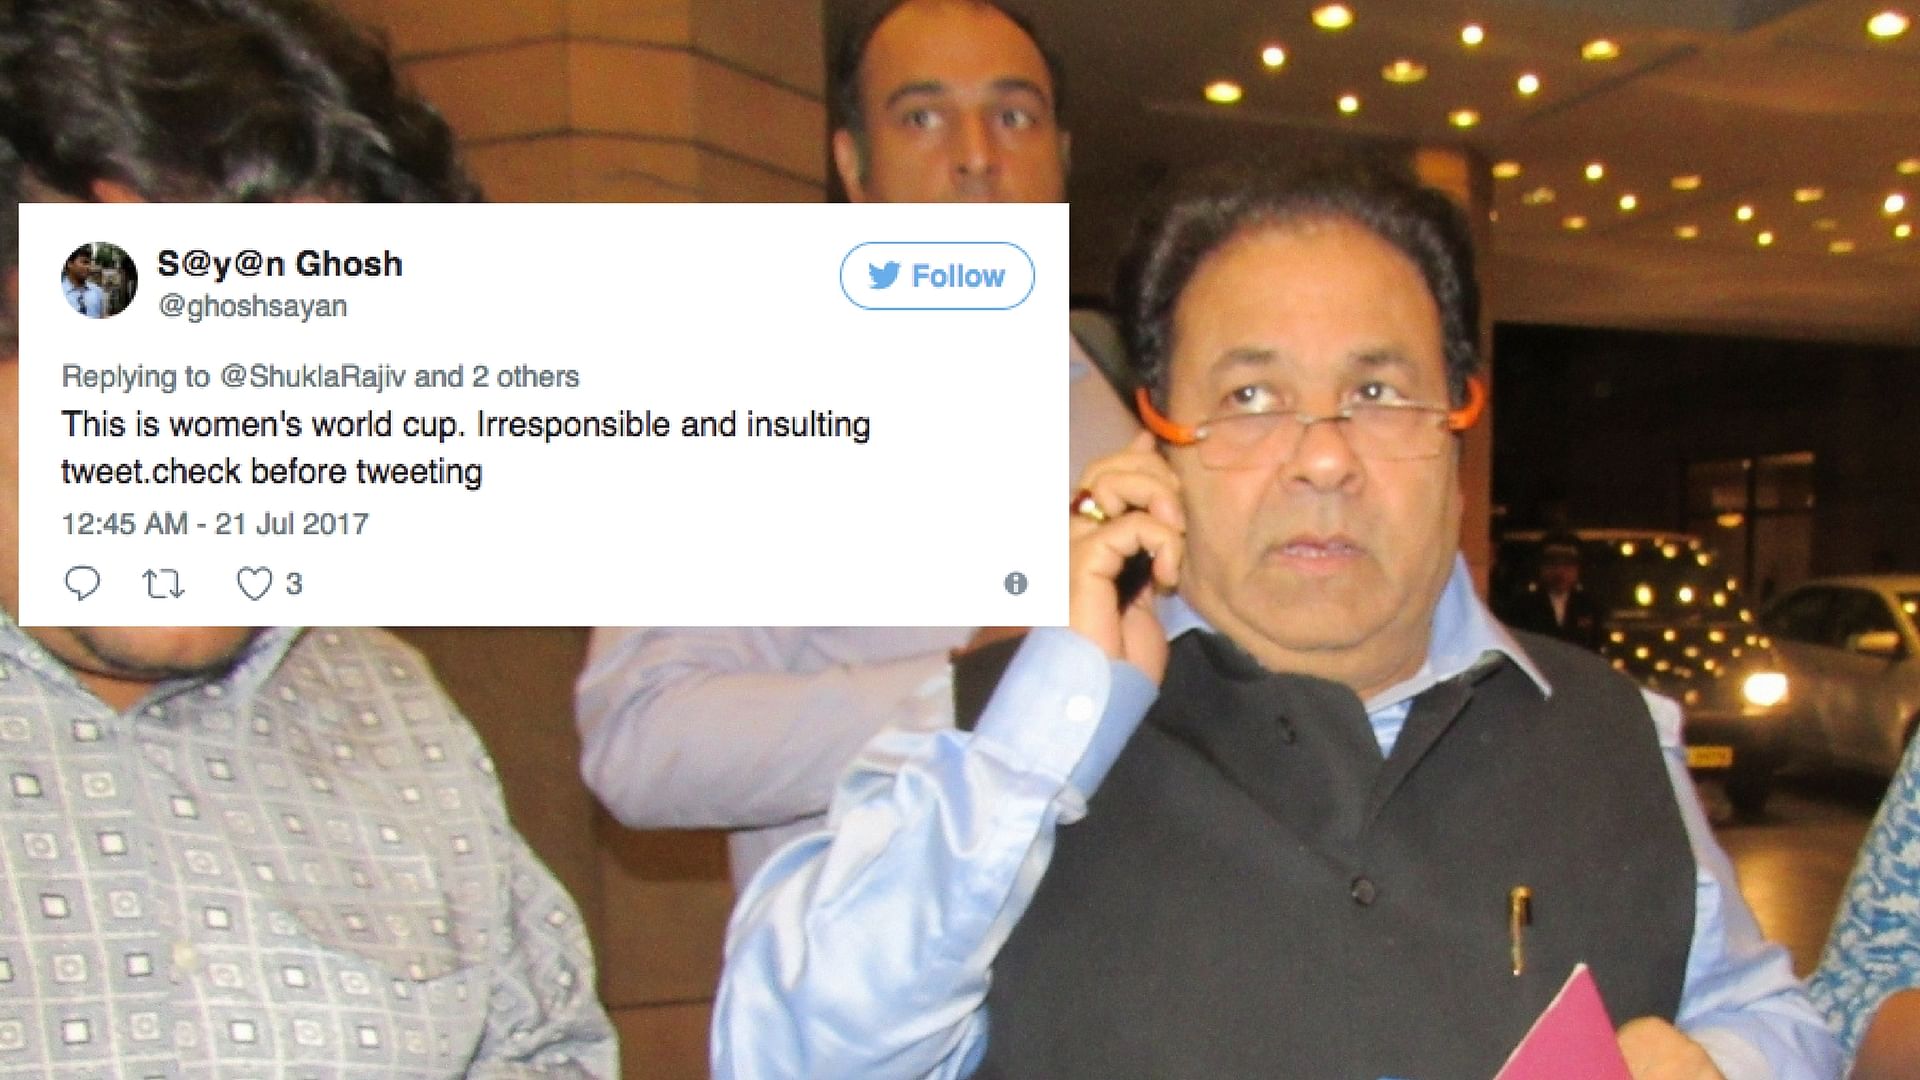 Rajeev Shukla tweeted an incorrect congratulatory message for the Indian women’s cricket team.